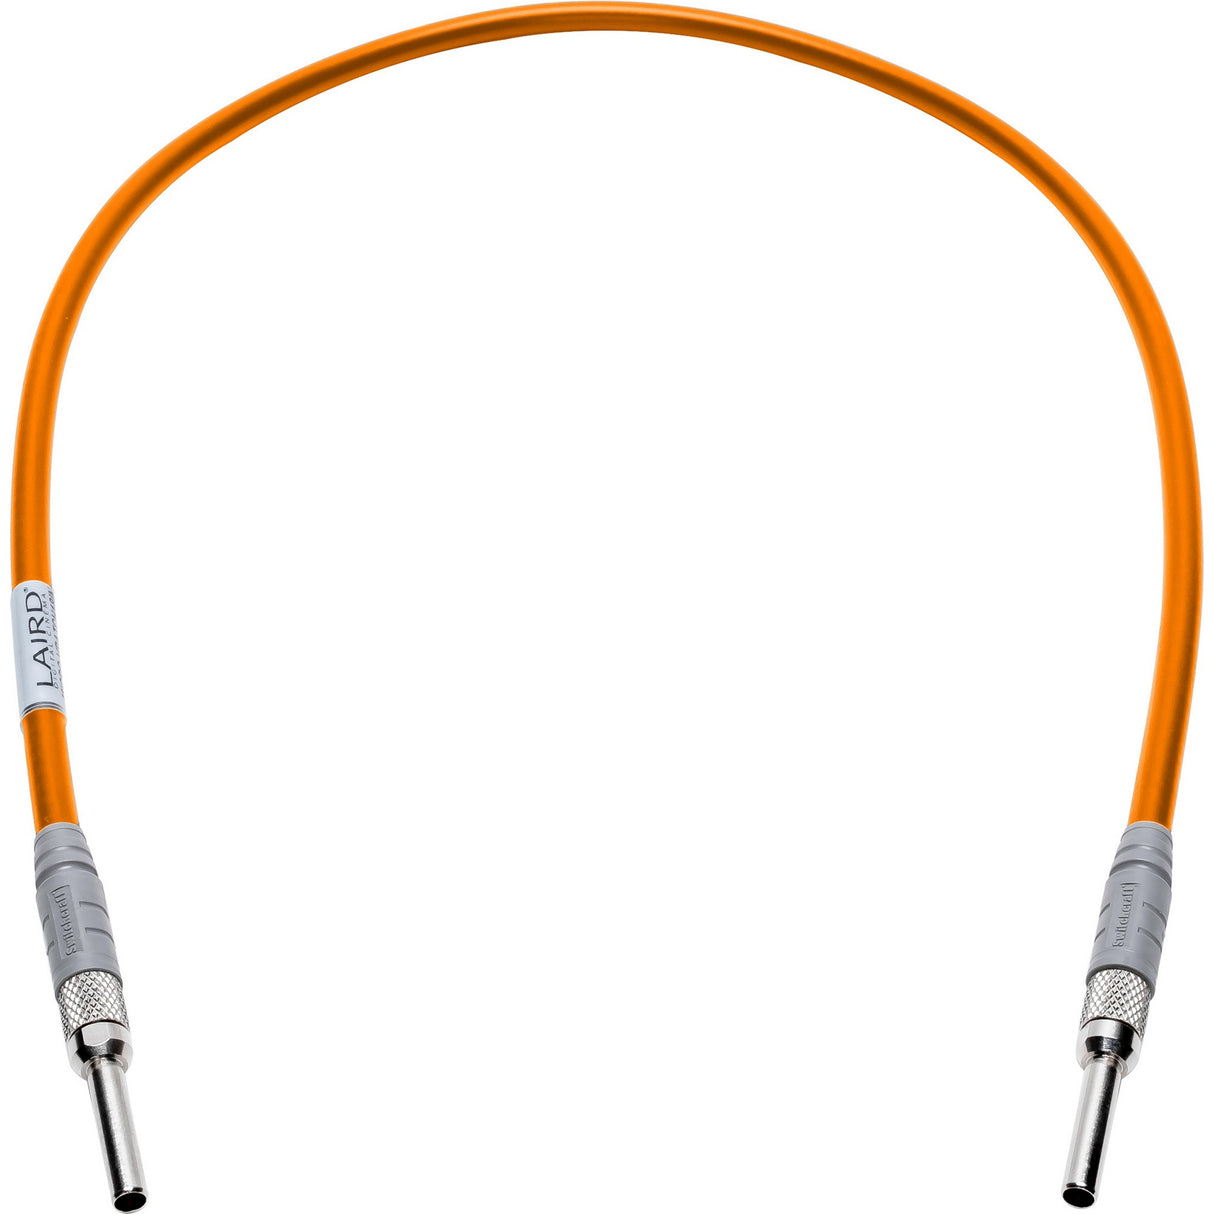 Laird MICRO-VPATCH-001OE 12G-SDI Micro Video Patch Cable, Orange, 1-Foot